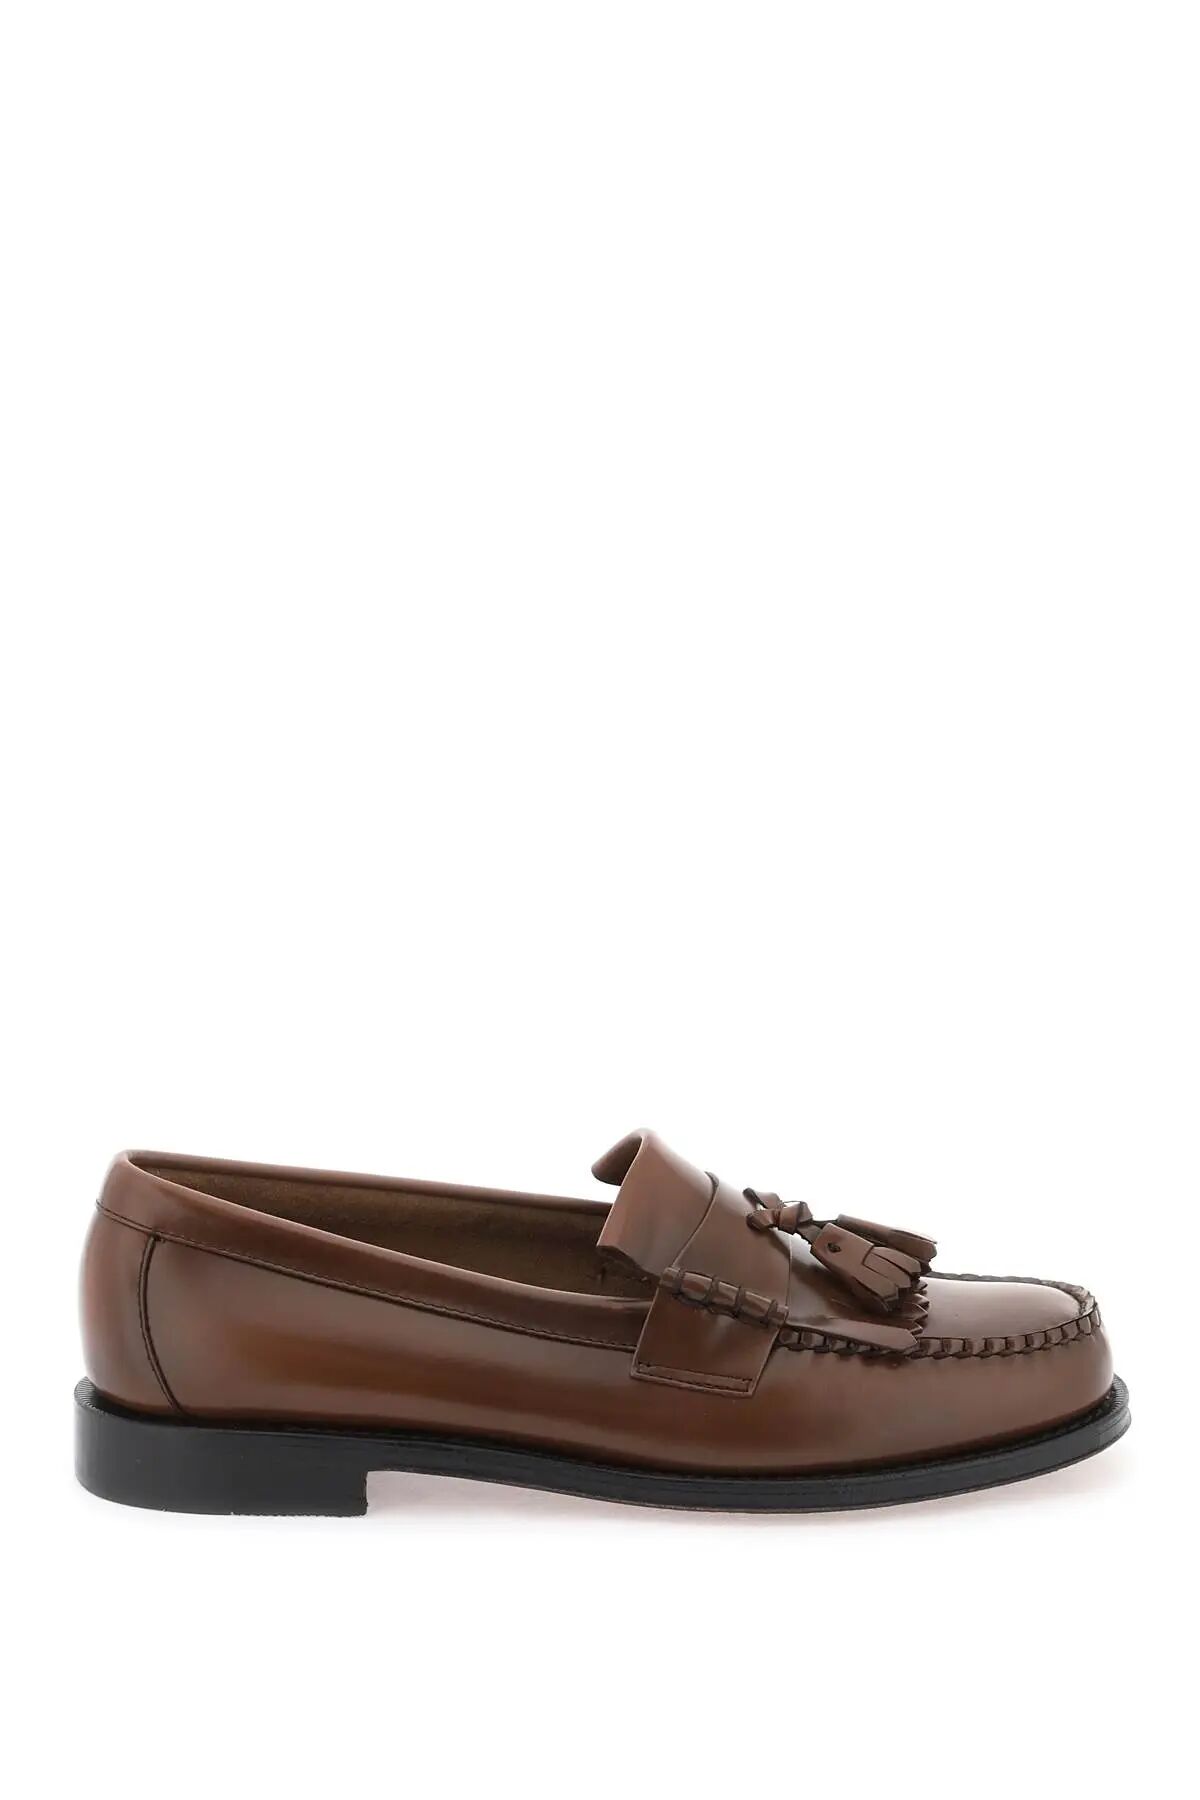 G.H. BASS Esther Kiltie Weejuns loafers  - Brown - male - Size: 44